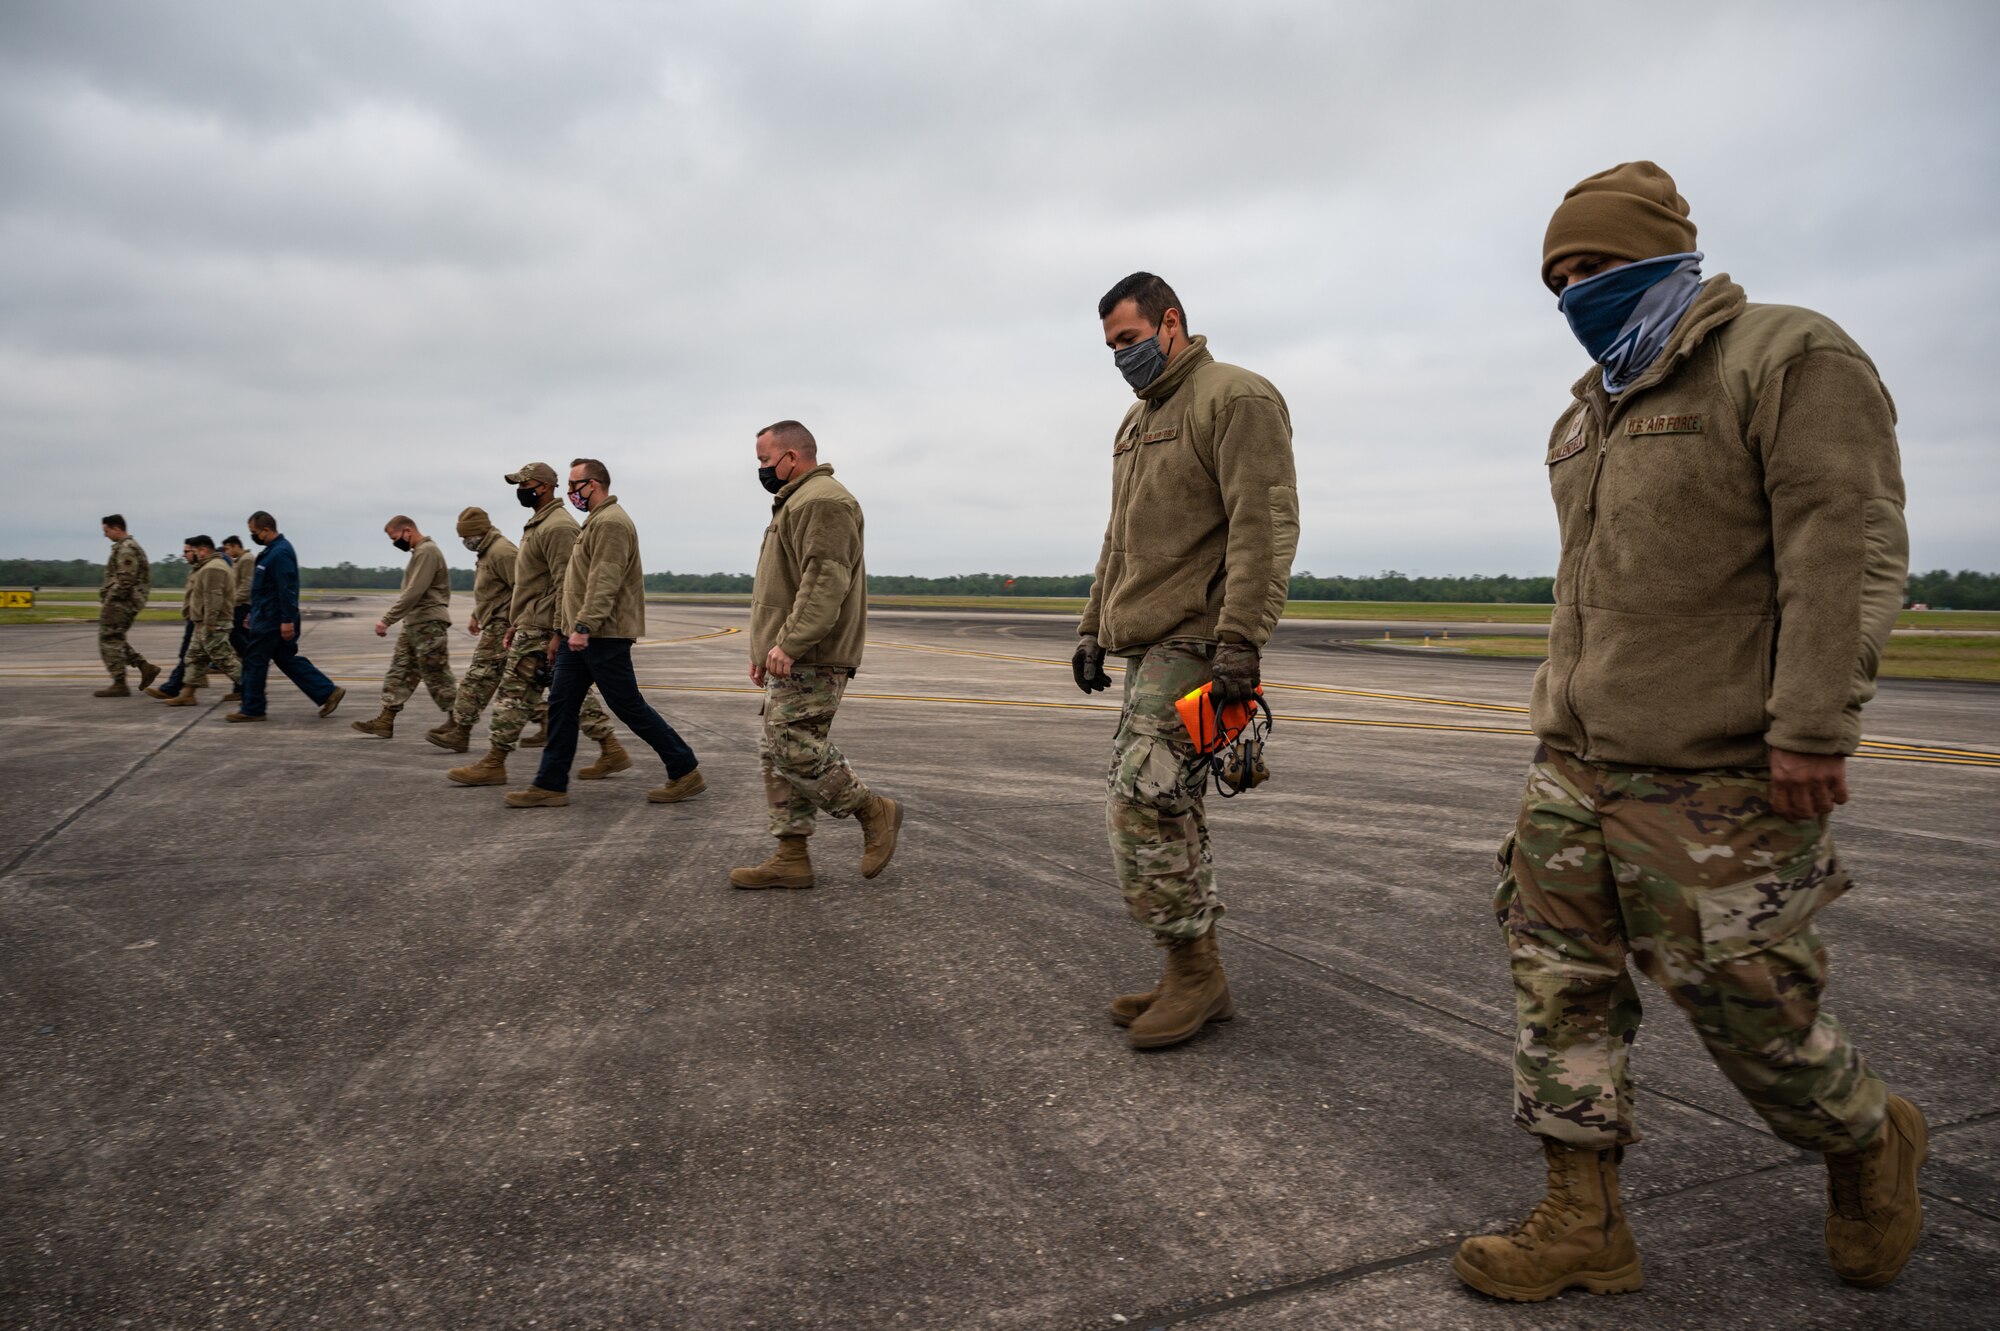 Airmen from the 162nd Wing, Arizona Air National Guard, conduct their daily F.O.D. (foreign object damage) walk during Operation Southern Lightning Strike 2021 at Naval Air Station Joint Reserve Base New Orleans, November 5. Personnel look for and collect any loose items on the flight line that could damage the engines of the F-16 fighter aircraft that they maintain. (U.S. Air National Guard Photo by Tech. Sgt. H. Edward Stramler)